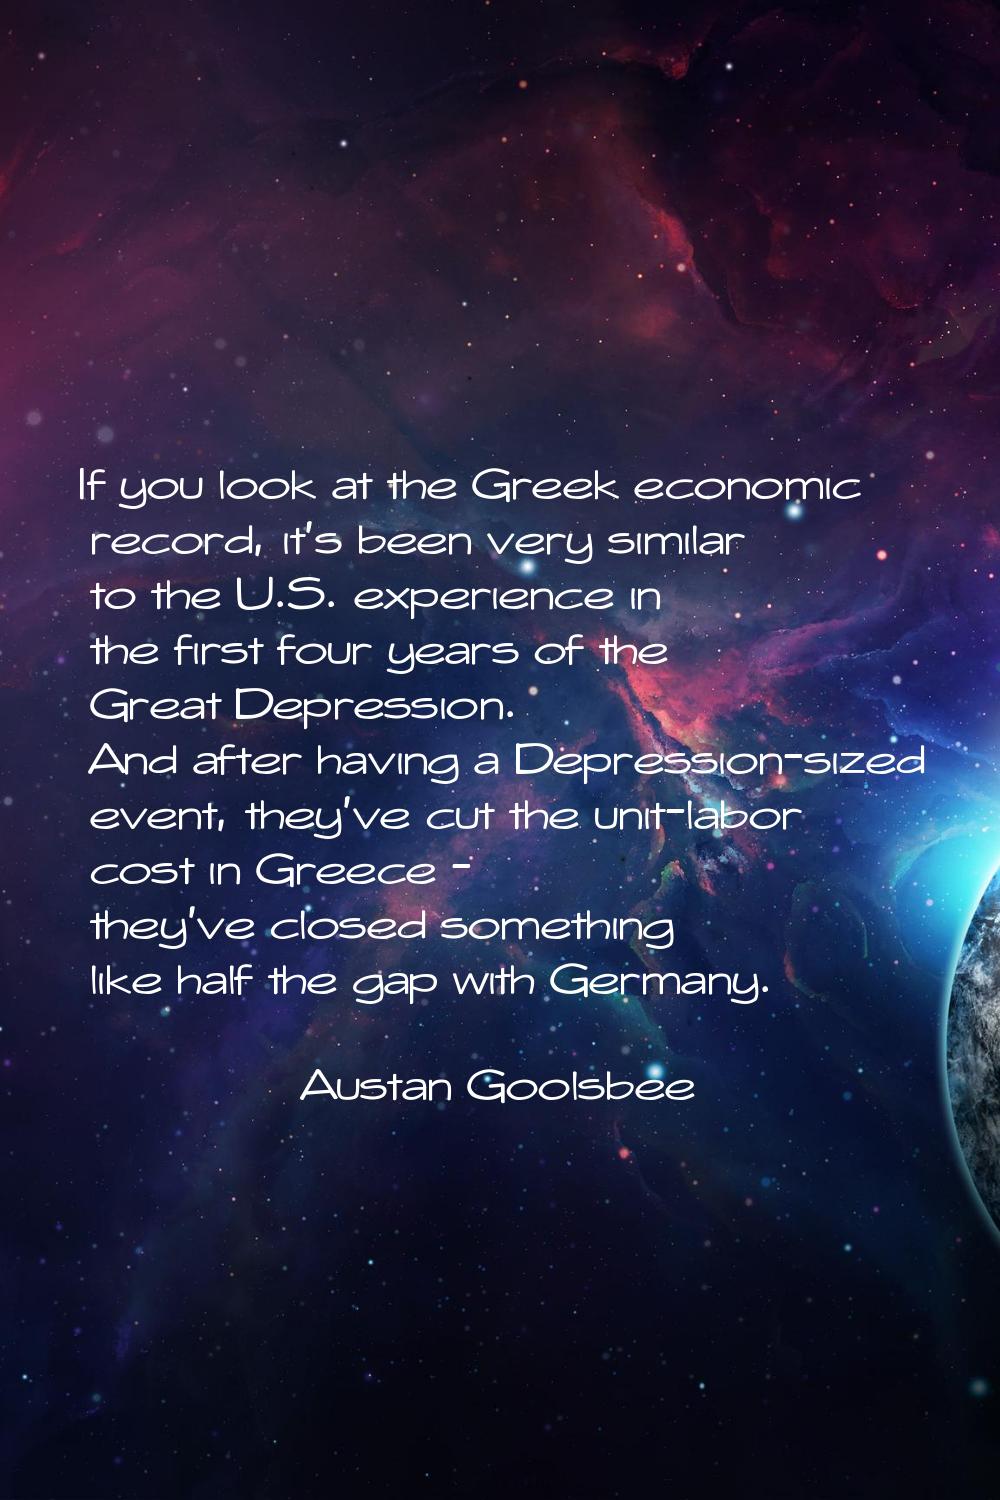 If you look at the Greek economic record, it's been very similar to the U.S. experience in the firs